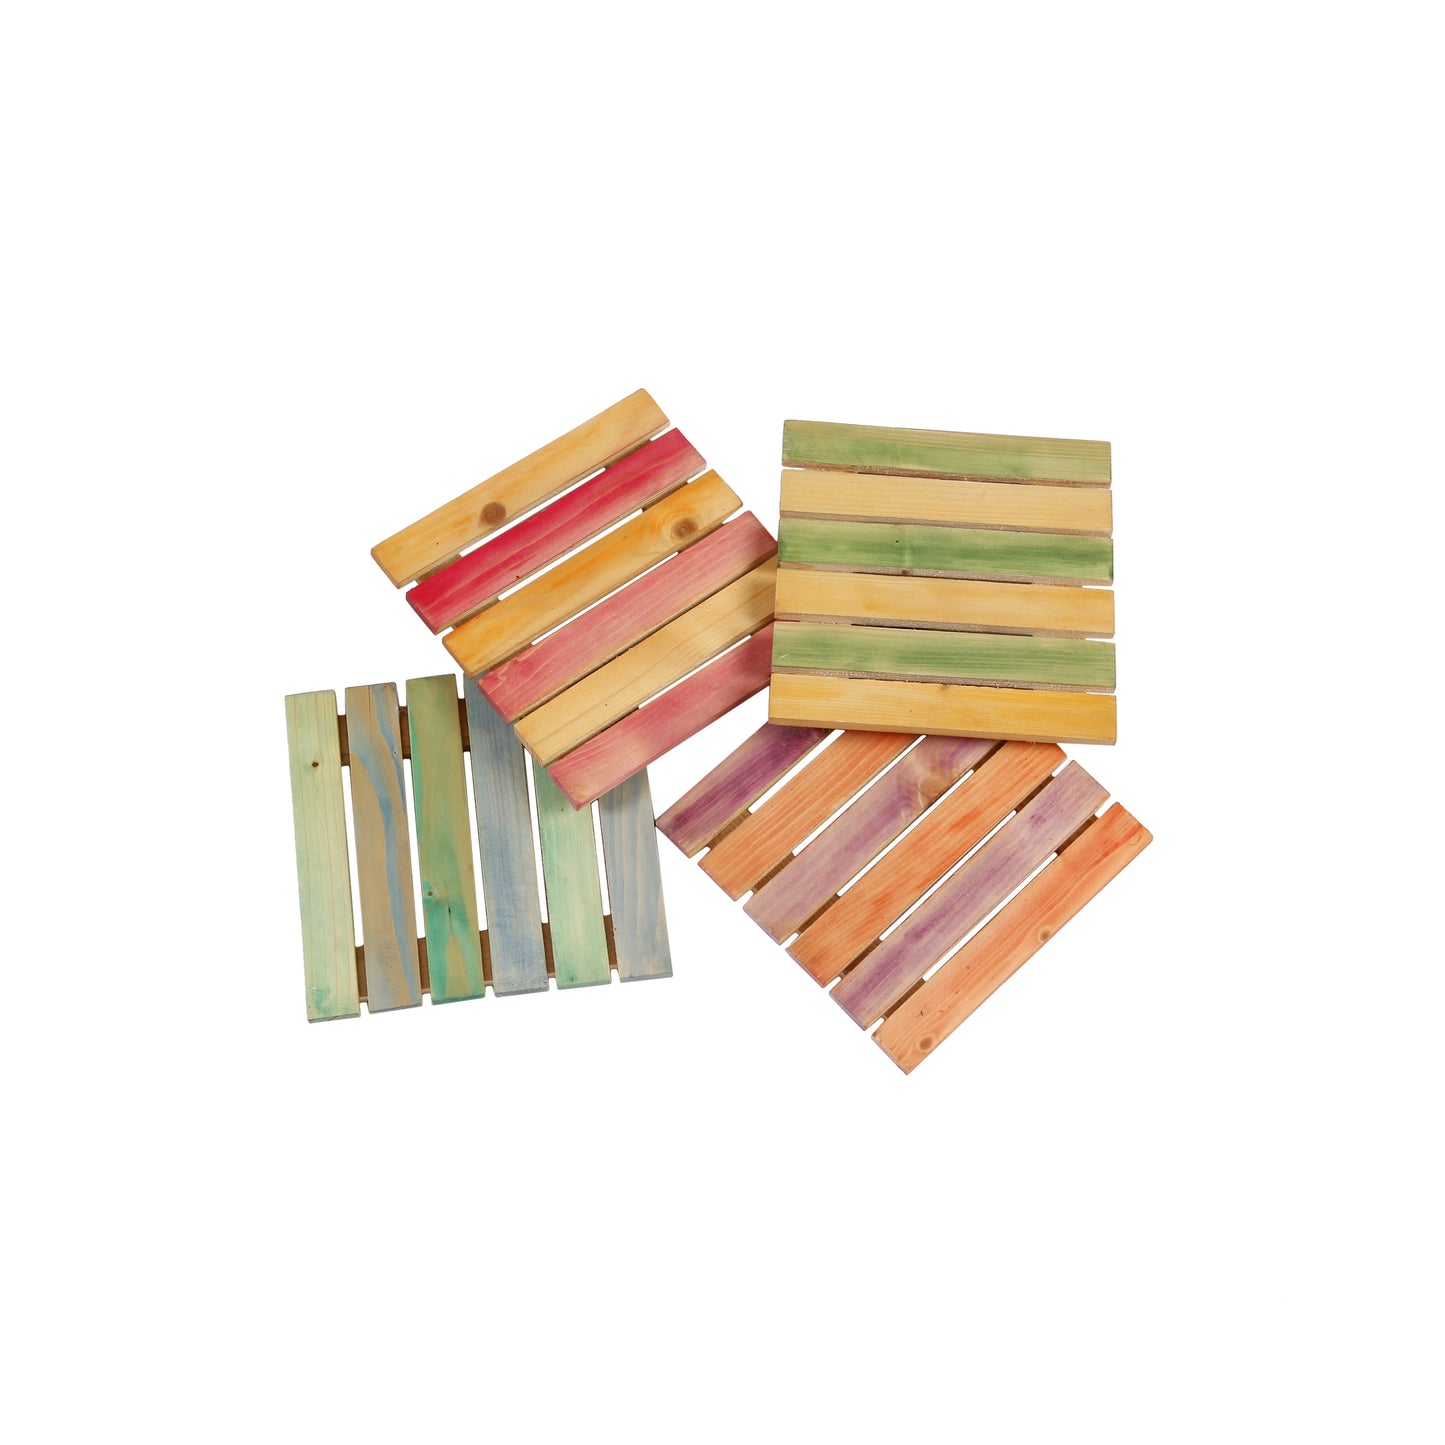 A Tiny Mistake Pine Wood Trivets, Place Mats, Table Accessory, Serveware, Set of 4 Trivets, Coasters for The Table, 15.9 x 15.3 x 1.5 cm (Multicoloured)